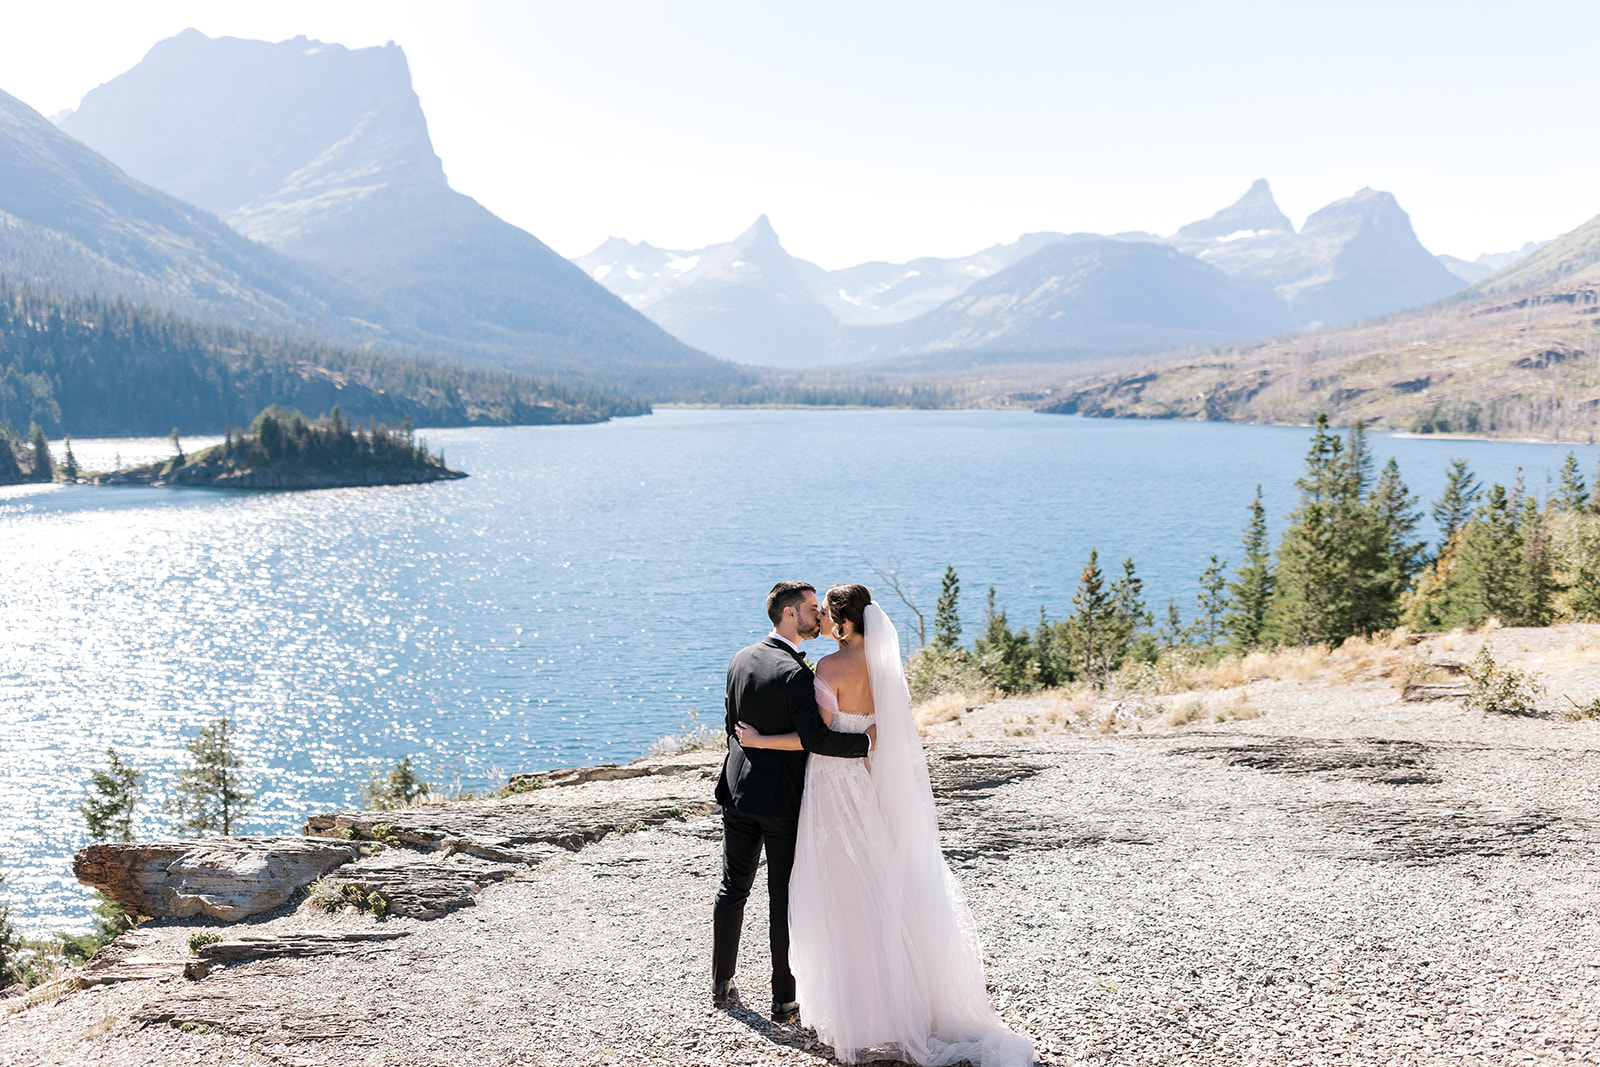 Bride and groom shares a kiss overlooking St Mary Lake at Sun Point in Glacier National Park